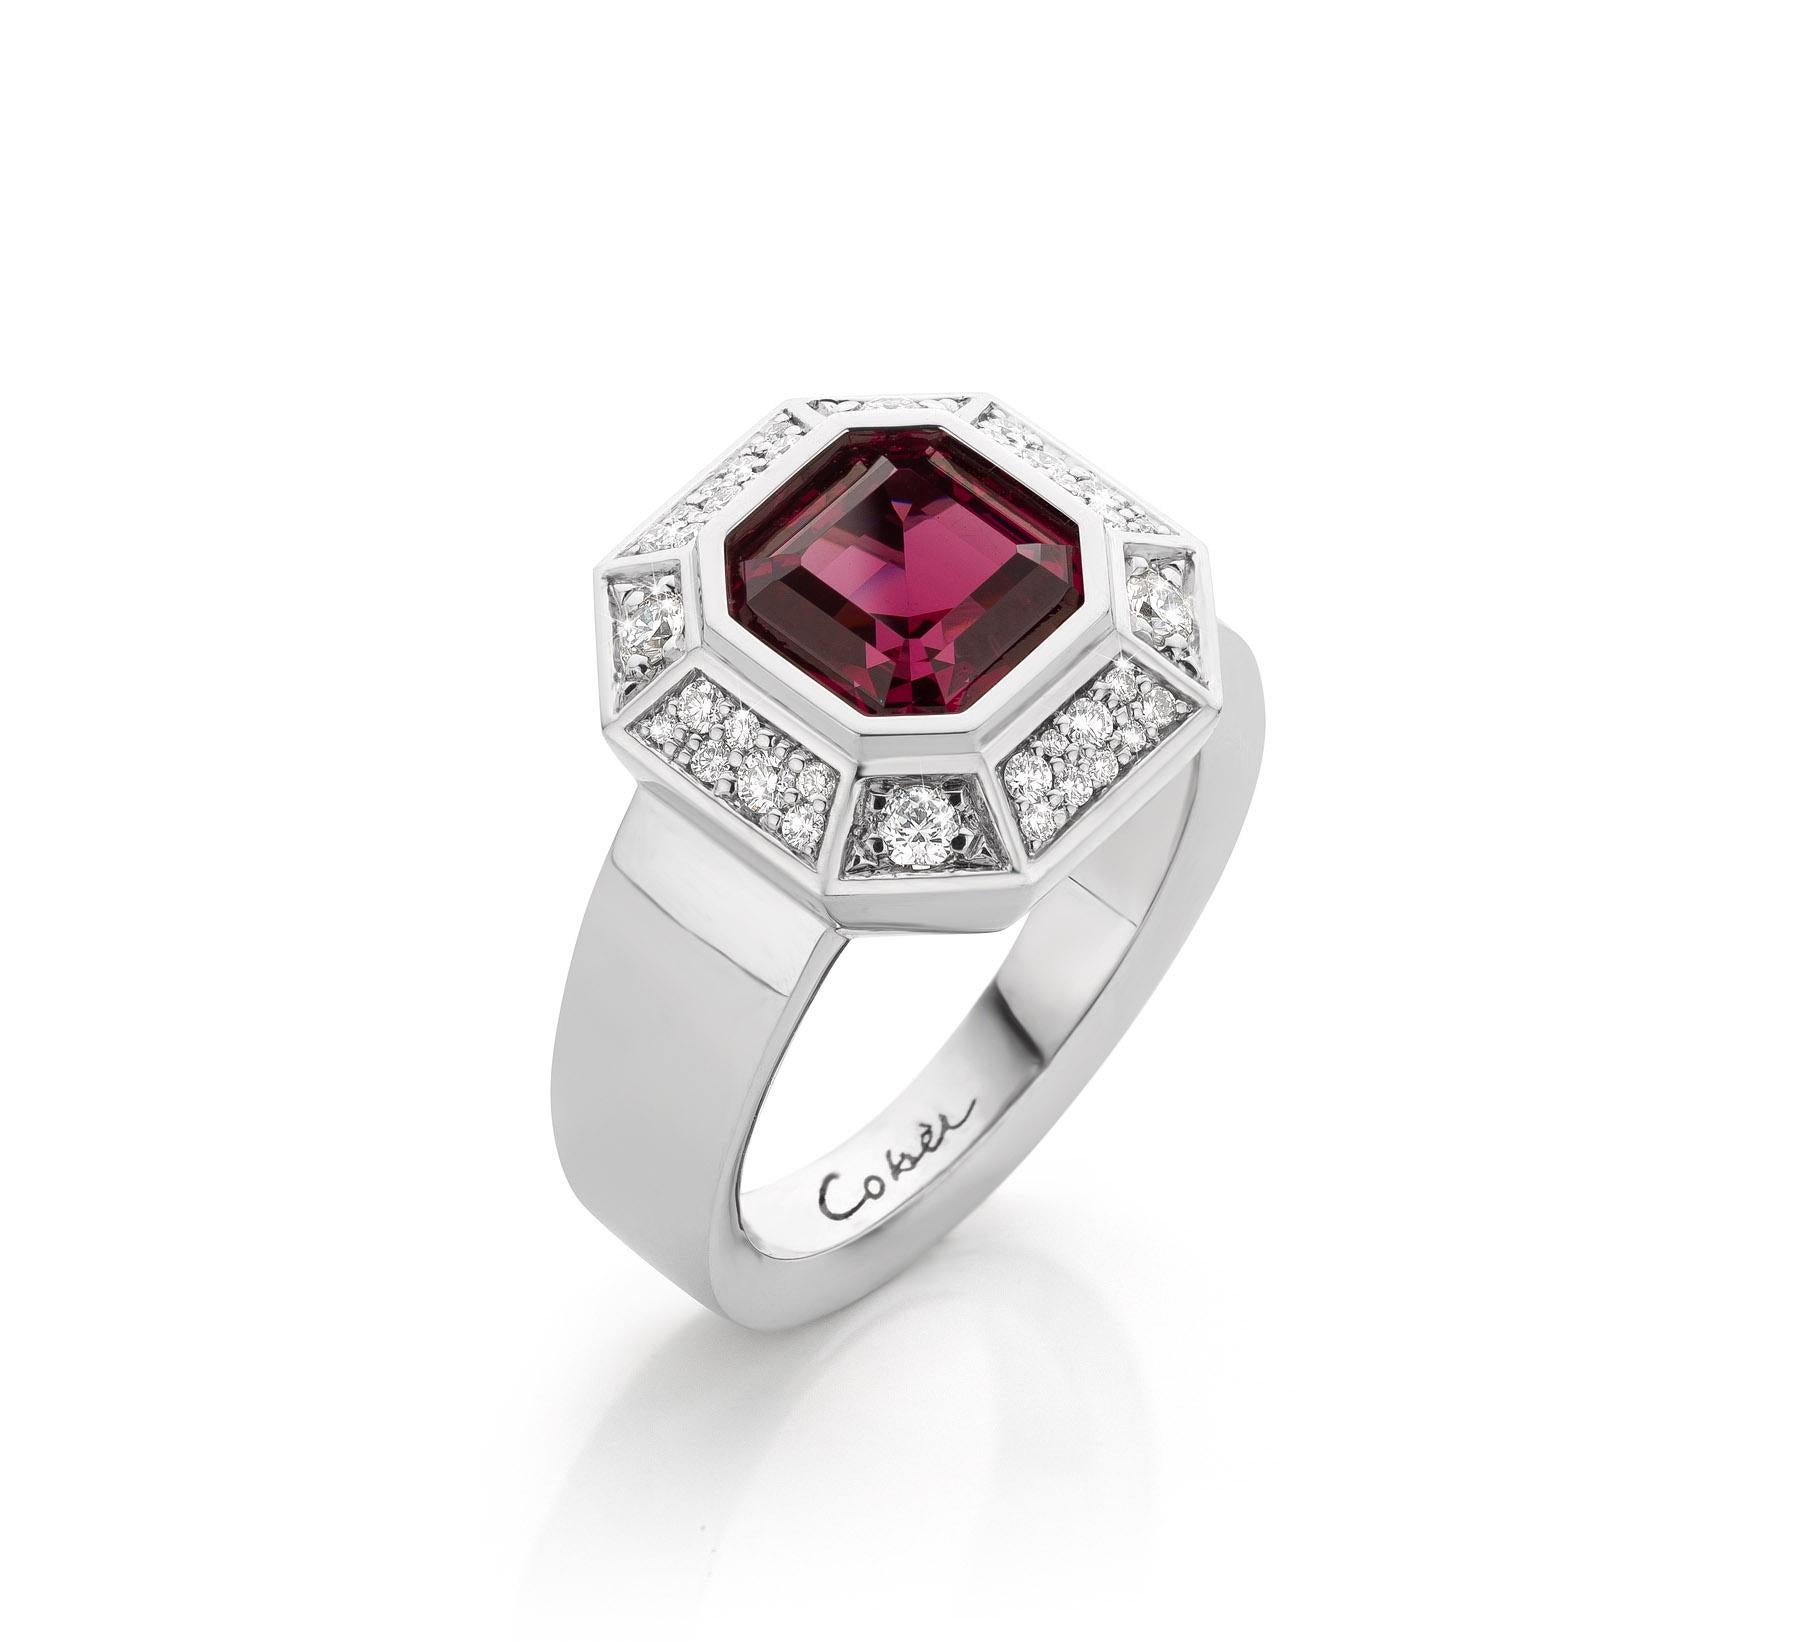 Cober “Catharina” 18K white gold ring with a Asscher-cut Garnet and 30 Diamonds For Sale 3